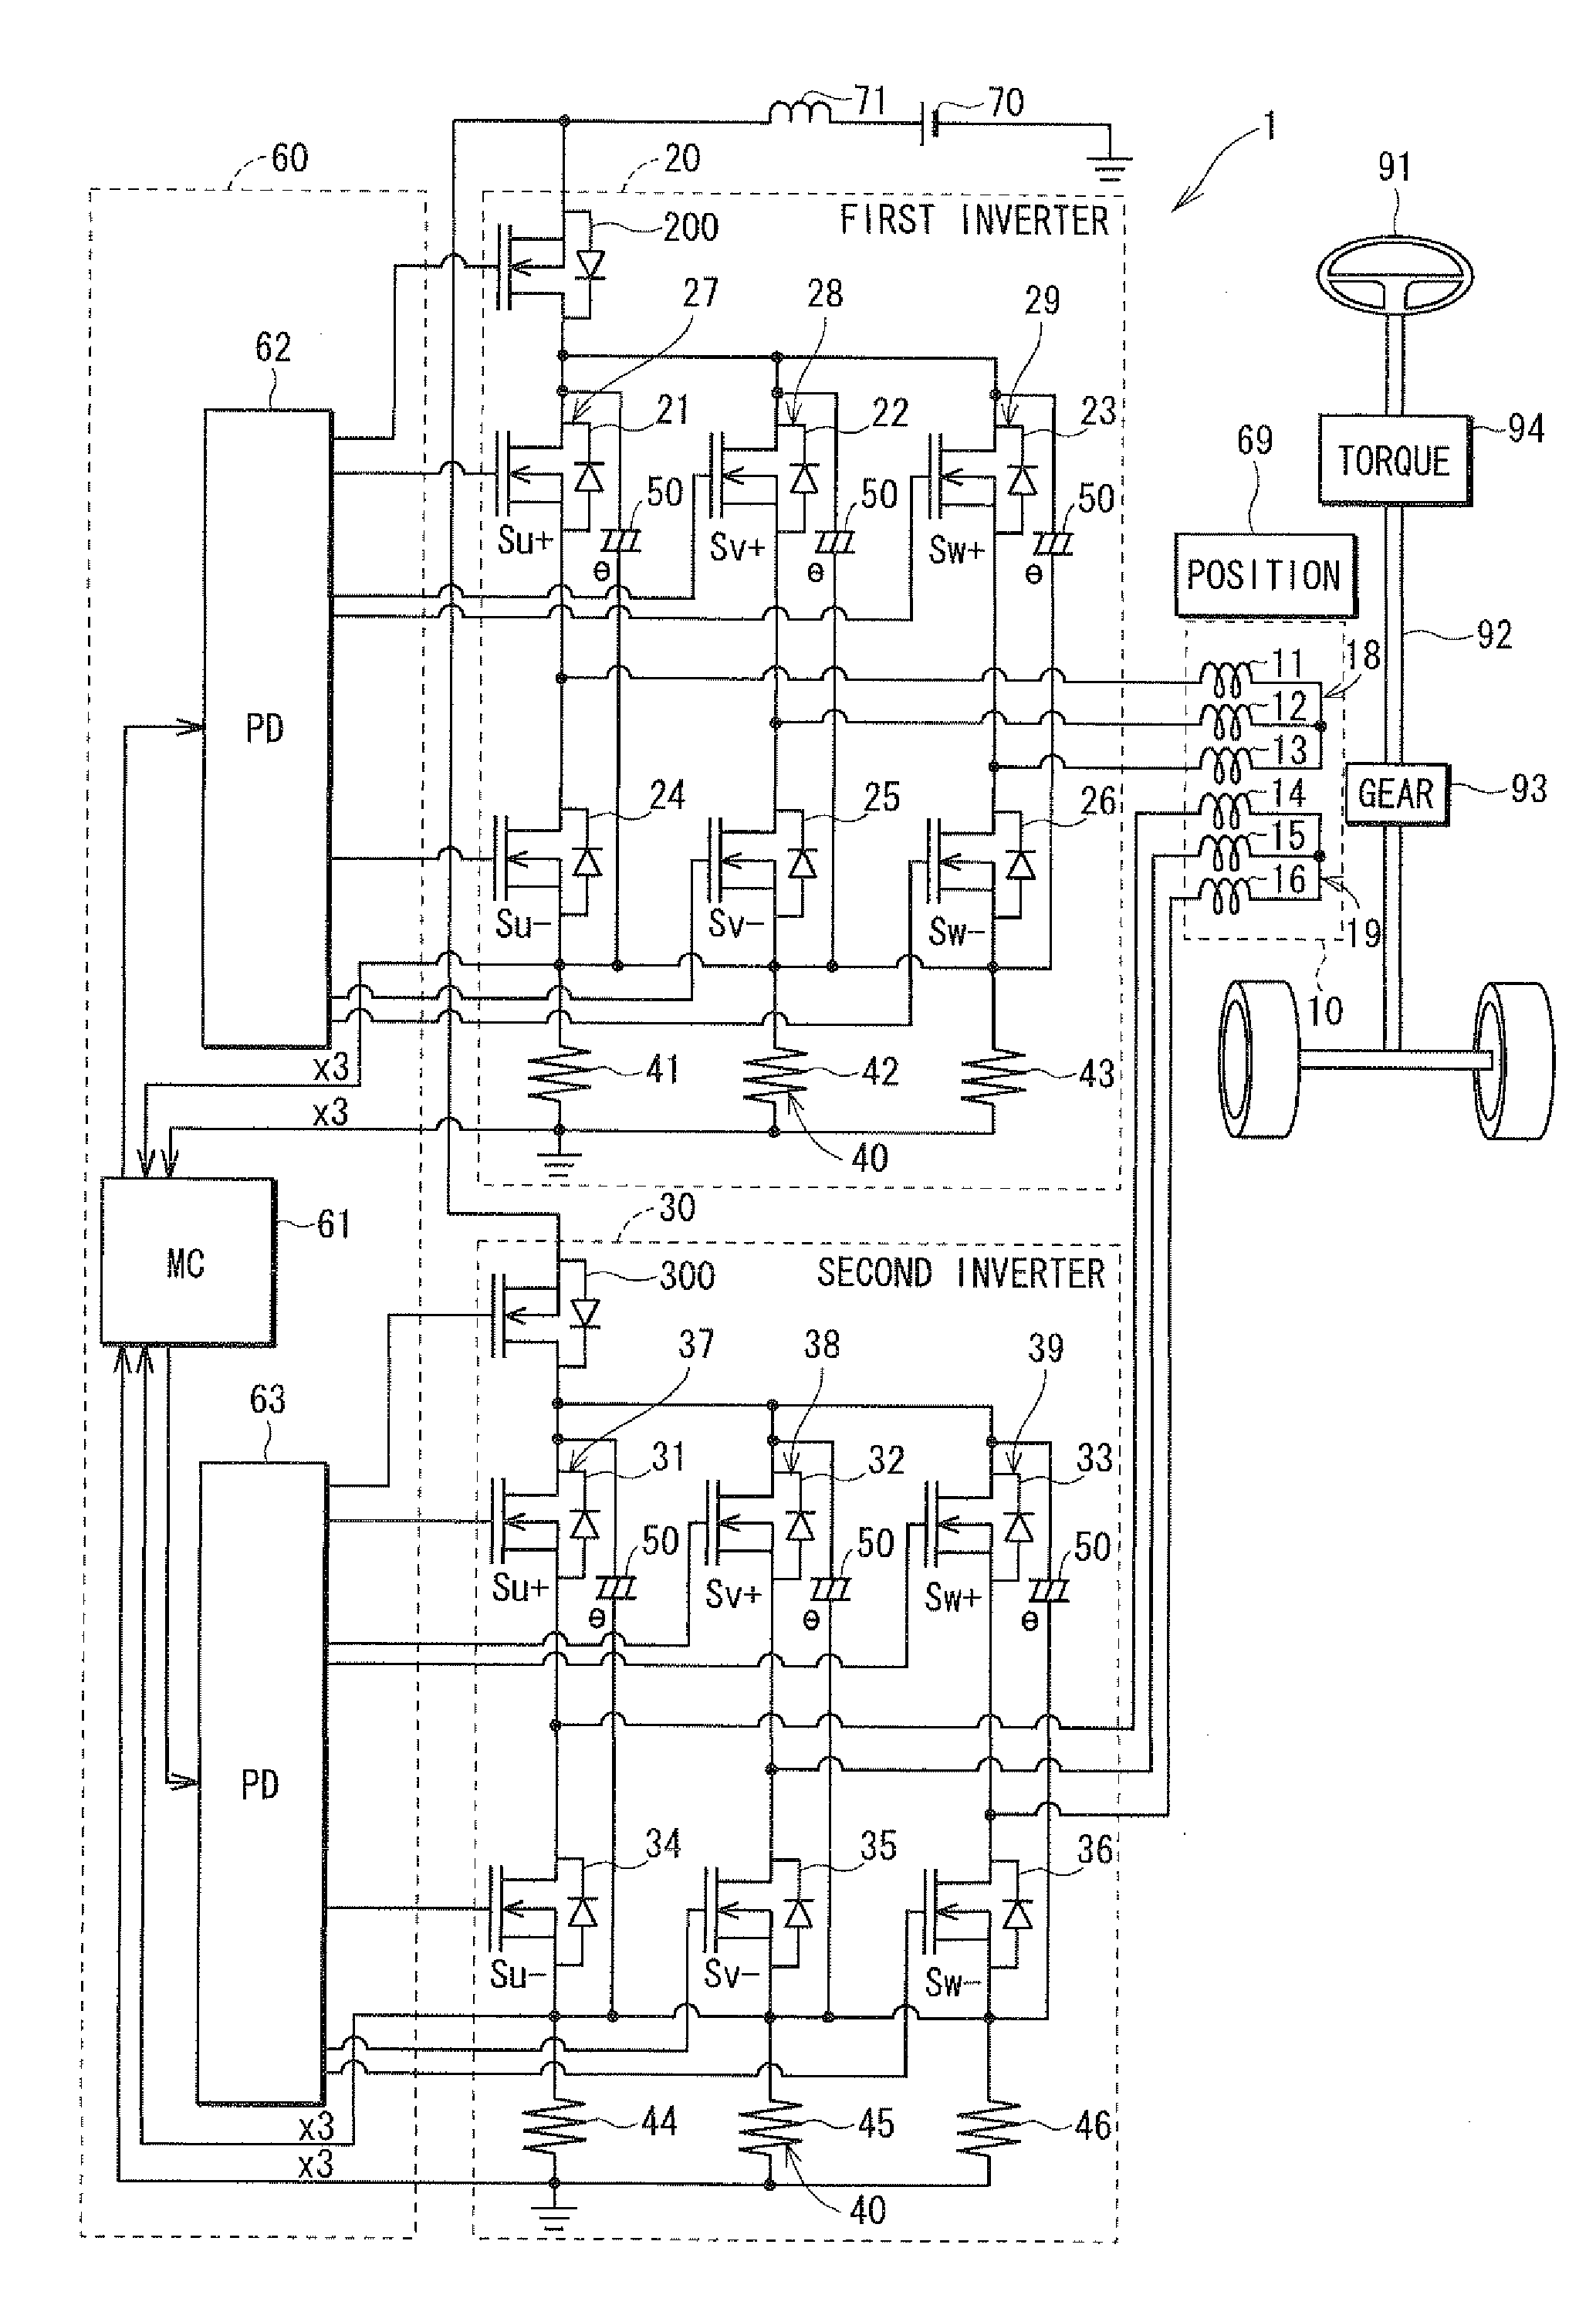 Multi-phase rotary machine control apparatus and electric power steering system using the same